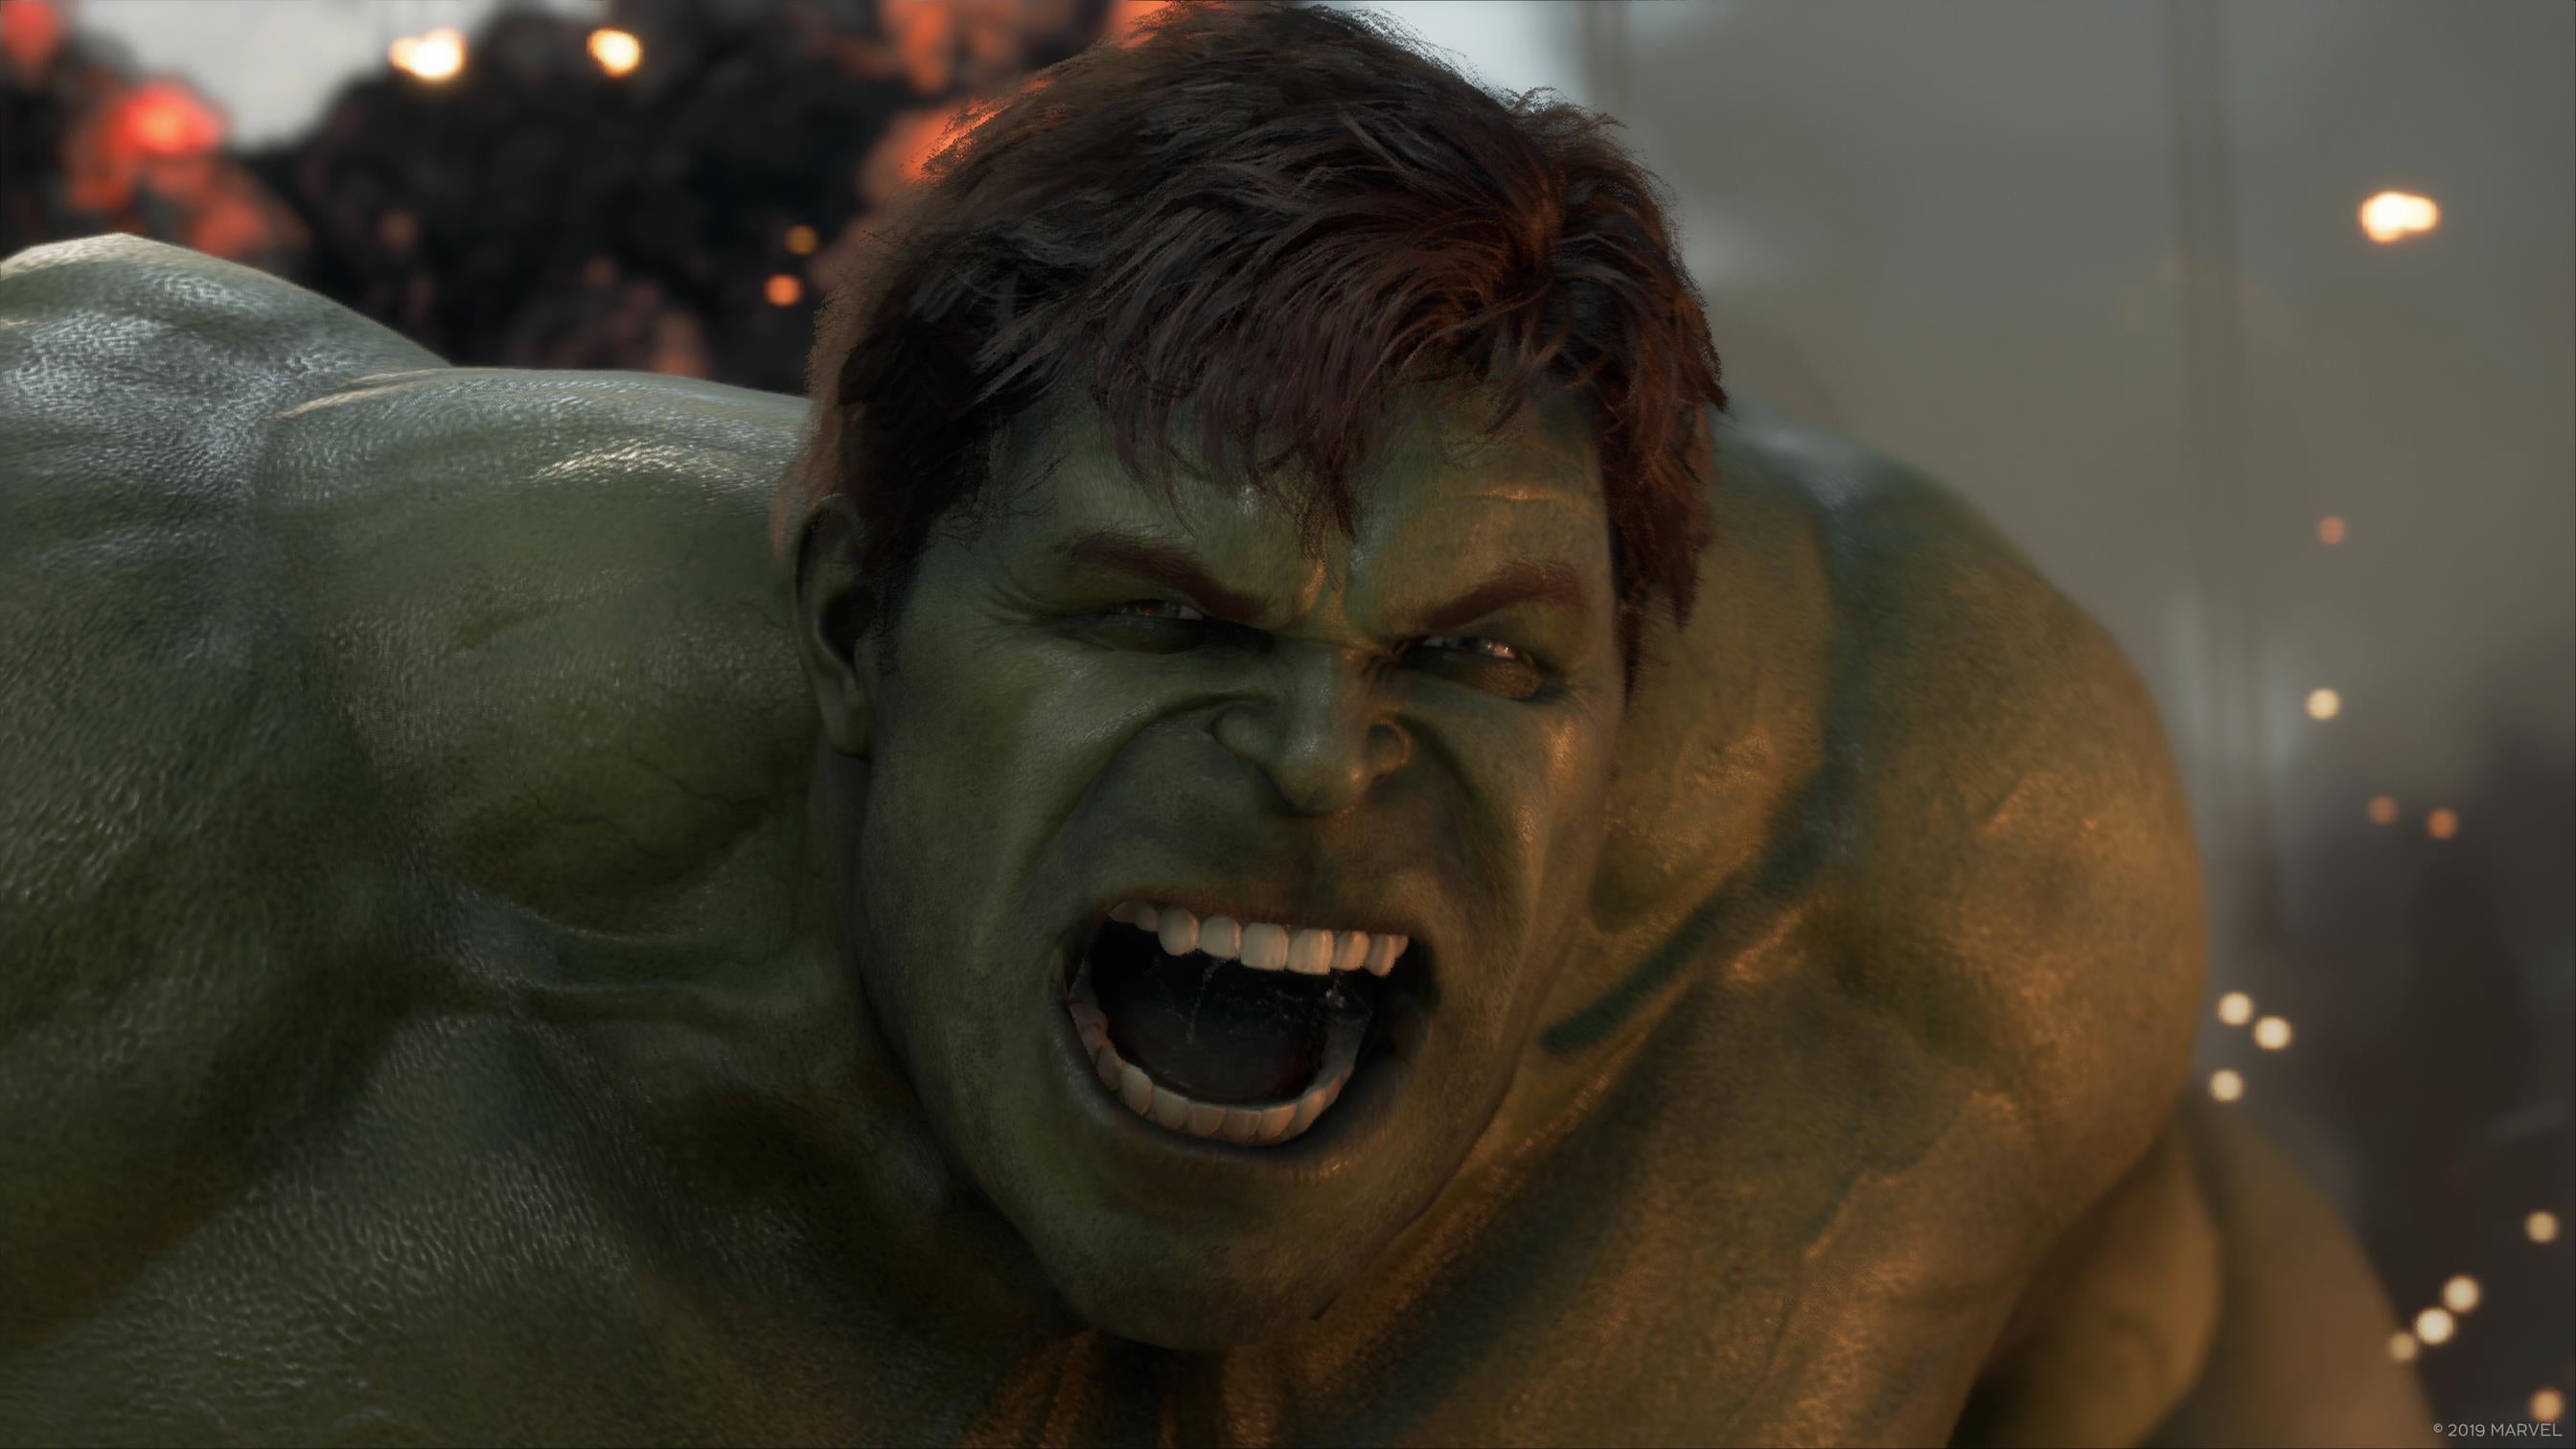 Image for Square Enix financials indicate Marvel's Avengers hasn't done as well as hoped